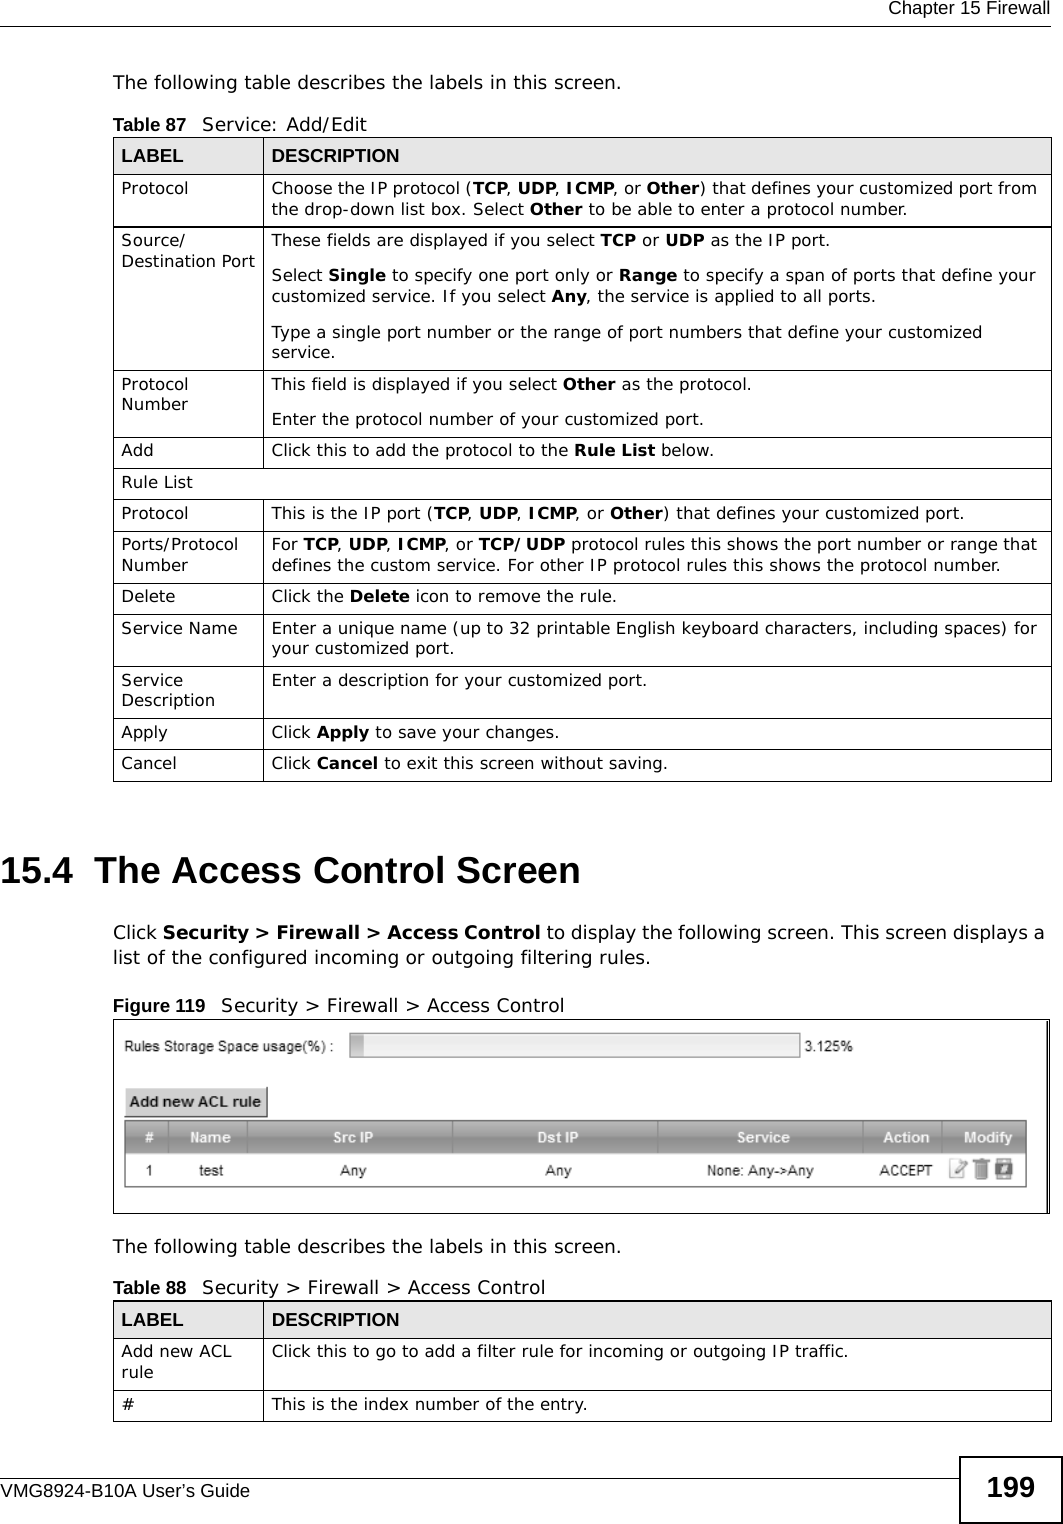  Chapter 15 FirewallVMG8924-B10A User’s Guide 199The following table describes the labels in this screen.15.4  The Access Control ScreenClick Security &gt; Firewall &gt; Access Control to display the following screen. This screen displays a list of the configured incoming or outgoing filtering rules. Figure 119   Security &gt; Firewall &gt; Access Control The following table describes the labels in this screen. Table 87   Service: Add/EditLABEL DESCRIPTIONProtocol Choose the IP protocol (TCP, UDP, ICMP, or Other) that defines your customized port from the drop-down list box. Select Other to be able to enter a protocol number.Source/Destination Port These fields are displayed if you select TCP or UDP as the IP port. Select Single to specify one port only or Range to specify a span of ports that define your customized service. If you select Any, the service is applied to all ports.Type a single port number or the range of port numbers that define your customized service.Protocol Number This field is displayed if you select Other as the protocol.Enter the protocol number of your customized port. Add Click this to add the protocol to the Rule List below.Rule ListProtocol This is the IP port (TCP, UDP, ICMP, or Other) that defines your customized port.Ports/Protocol Number For TCP, UDP, ICMP, or TCP/UDP protocol rules this shows the port number or range that defines the custom service. For other IP protocol rules this shows the protocol number. Delete Click the Delete icon to remove the rule.Service Name Enter a unique name (up to 32 printable English keyboard characters, including spaces) for your customized port. Service Description Enter a description for your customized port.Apply Click Apply to save your changes.Cancel Click Cancel to exit this screen without saving.Table 88   Security &gt; Firewall &gt; Access ControlLABEL DESCRIPTIONAdd new ACL rule Click this to go to add a filter rule for incoming or outgoing IP traffic.#This is the index number of the entry.